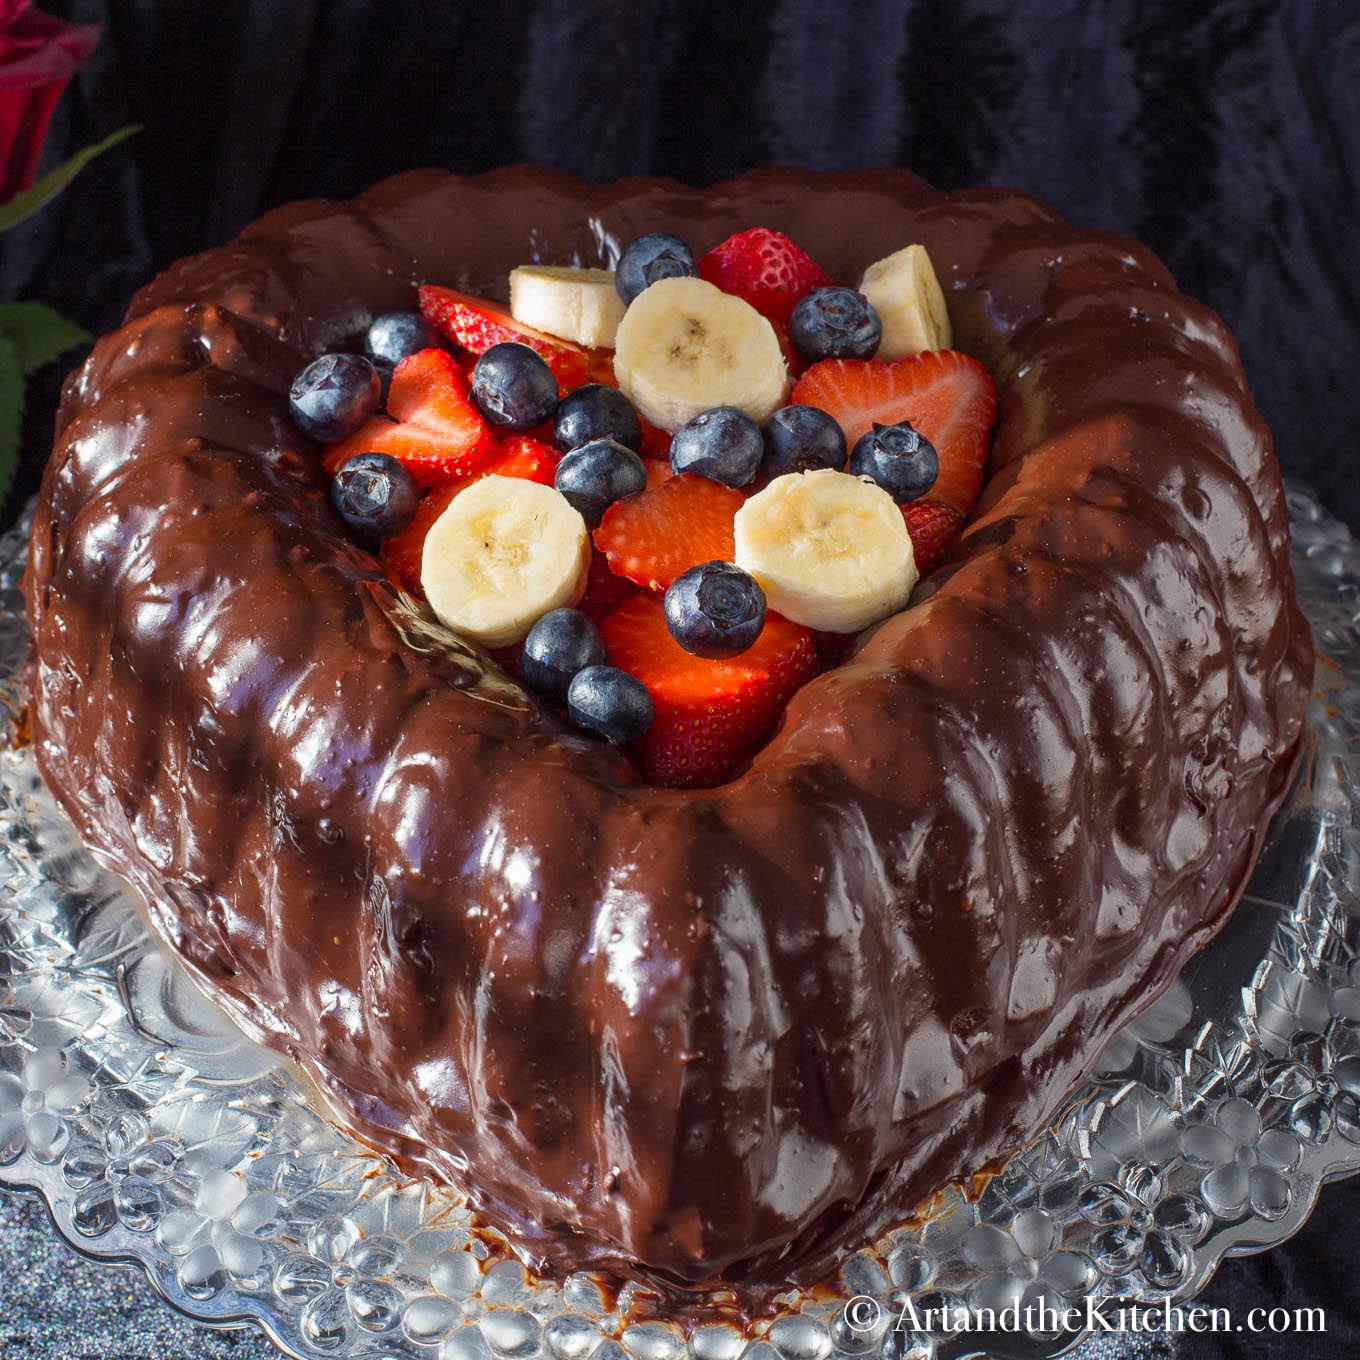 Heart shaped chocolate cake covered in chocolate ganache. Centre filled with berries and banana slices.